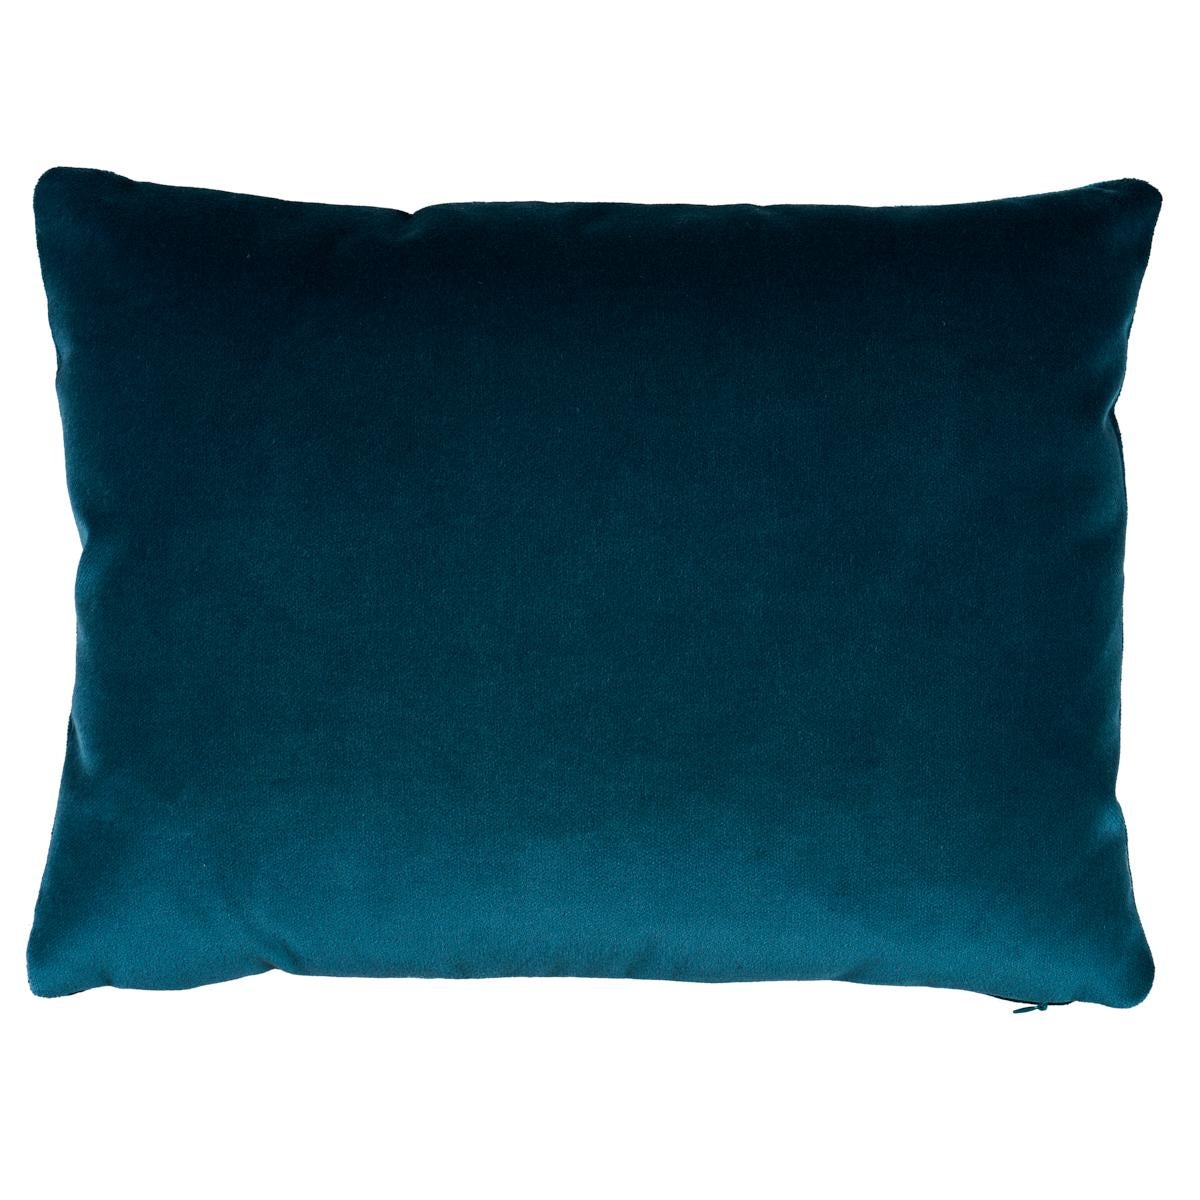 This pillow features Marion Velvet Tape with a knife edge finish. A scrolling leaf pattern in jacquard cut velvet gives this sky-colored accessory a luster that's positively luxurious and absolutely chic. Body of pillow is Rocky Performance Velvet.